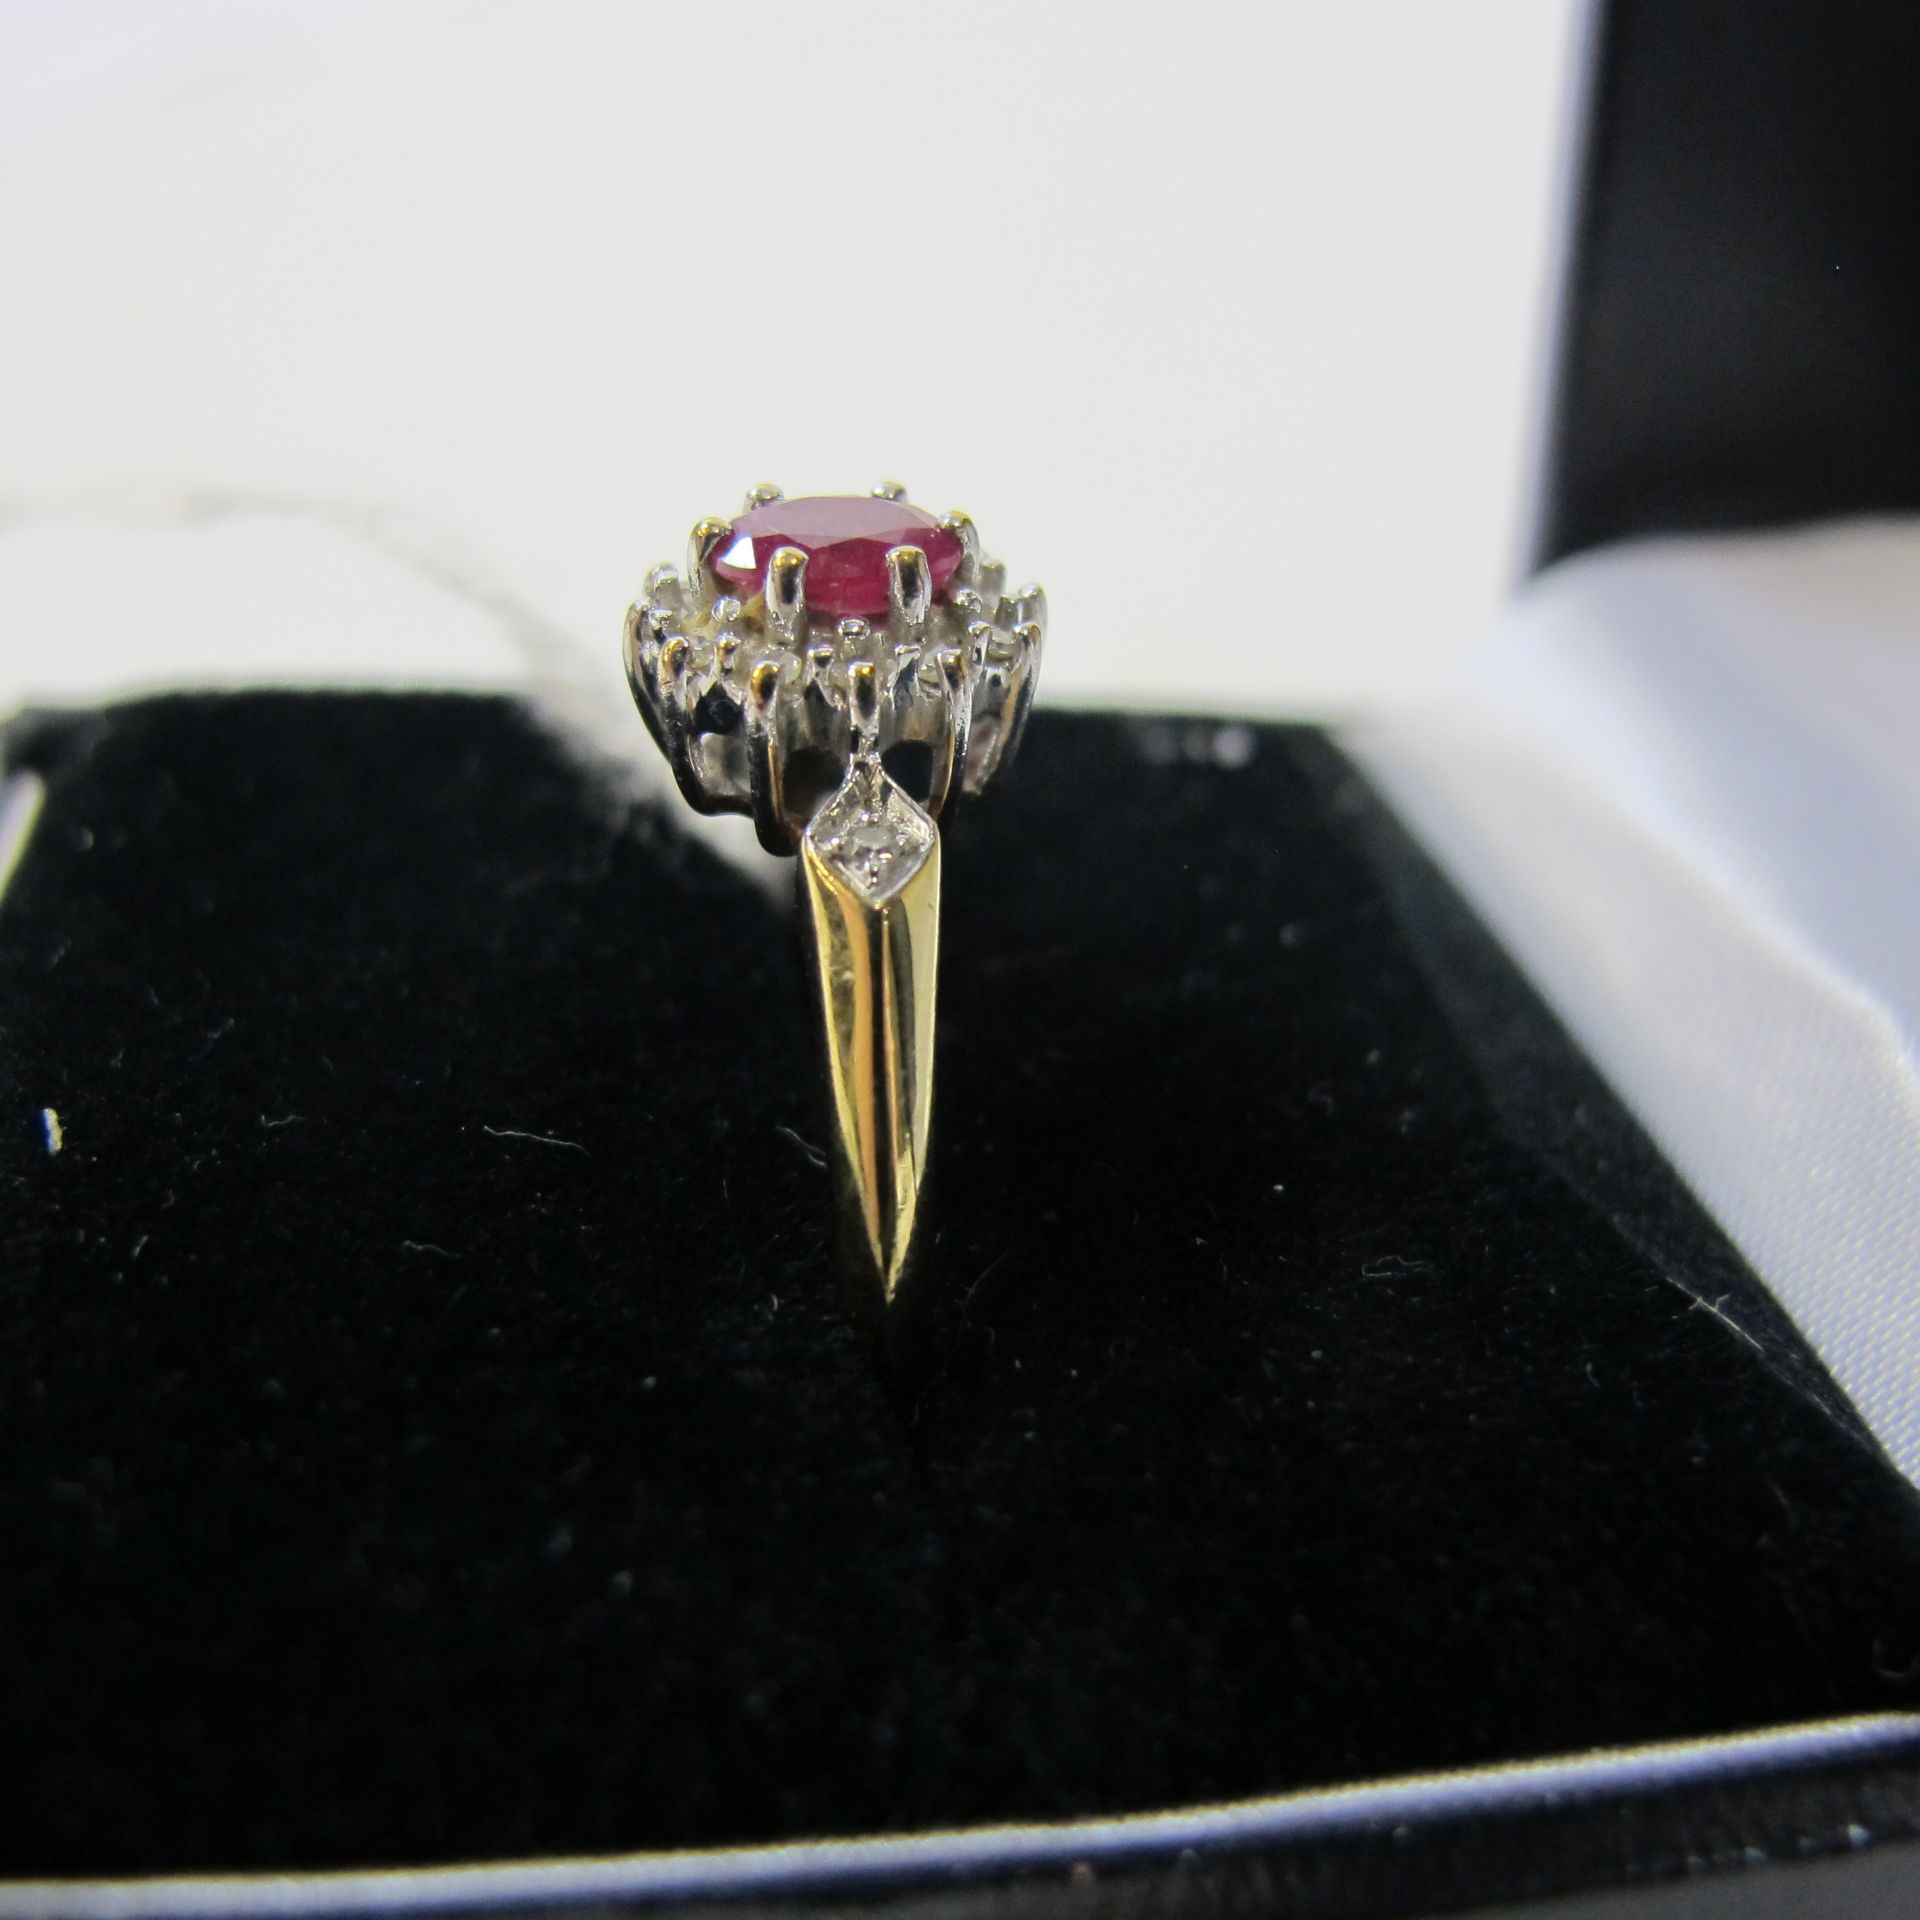 9ct Gold Ruby and Diamond Set Ring, size O½' (est £50-£100) - Image 2 of 2